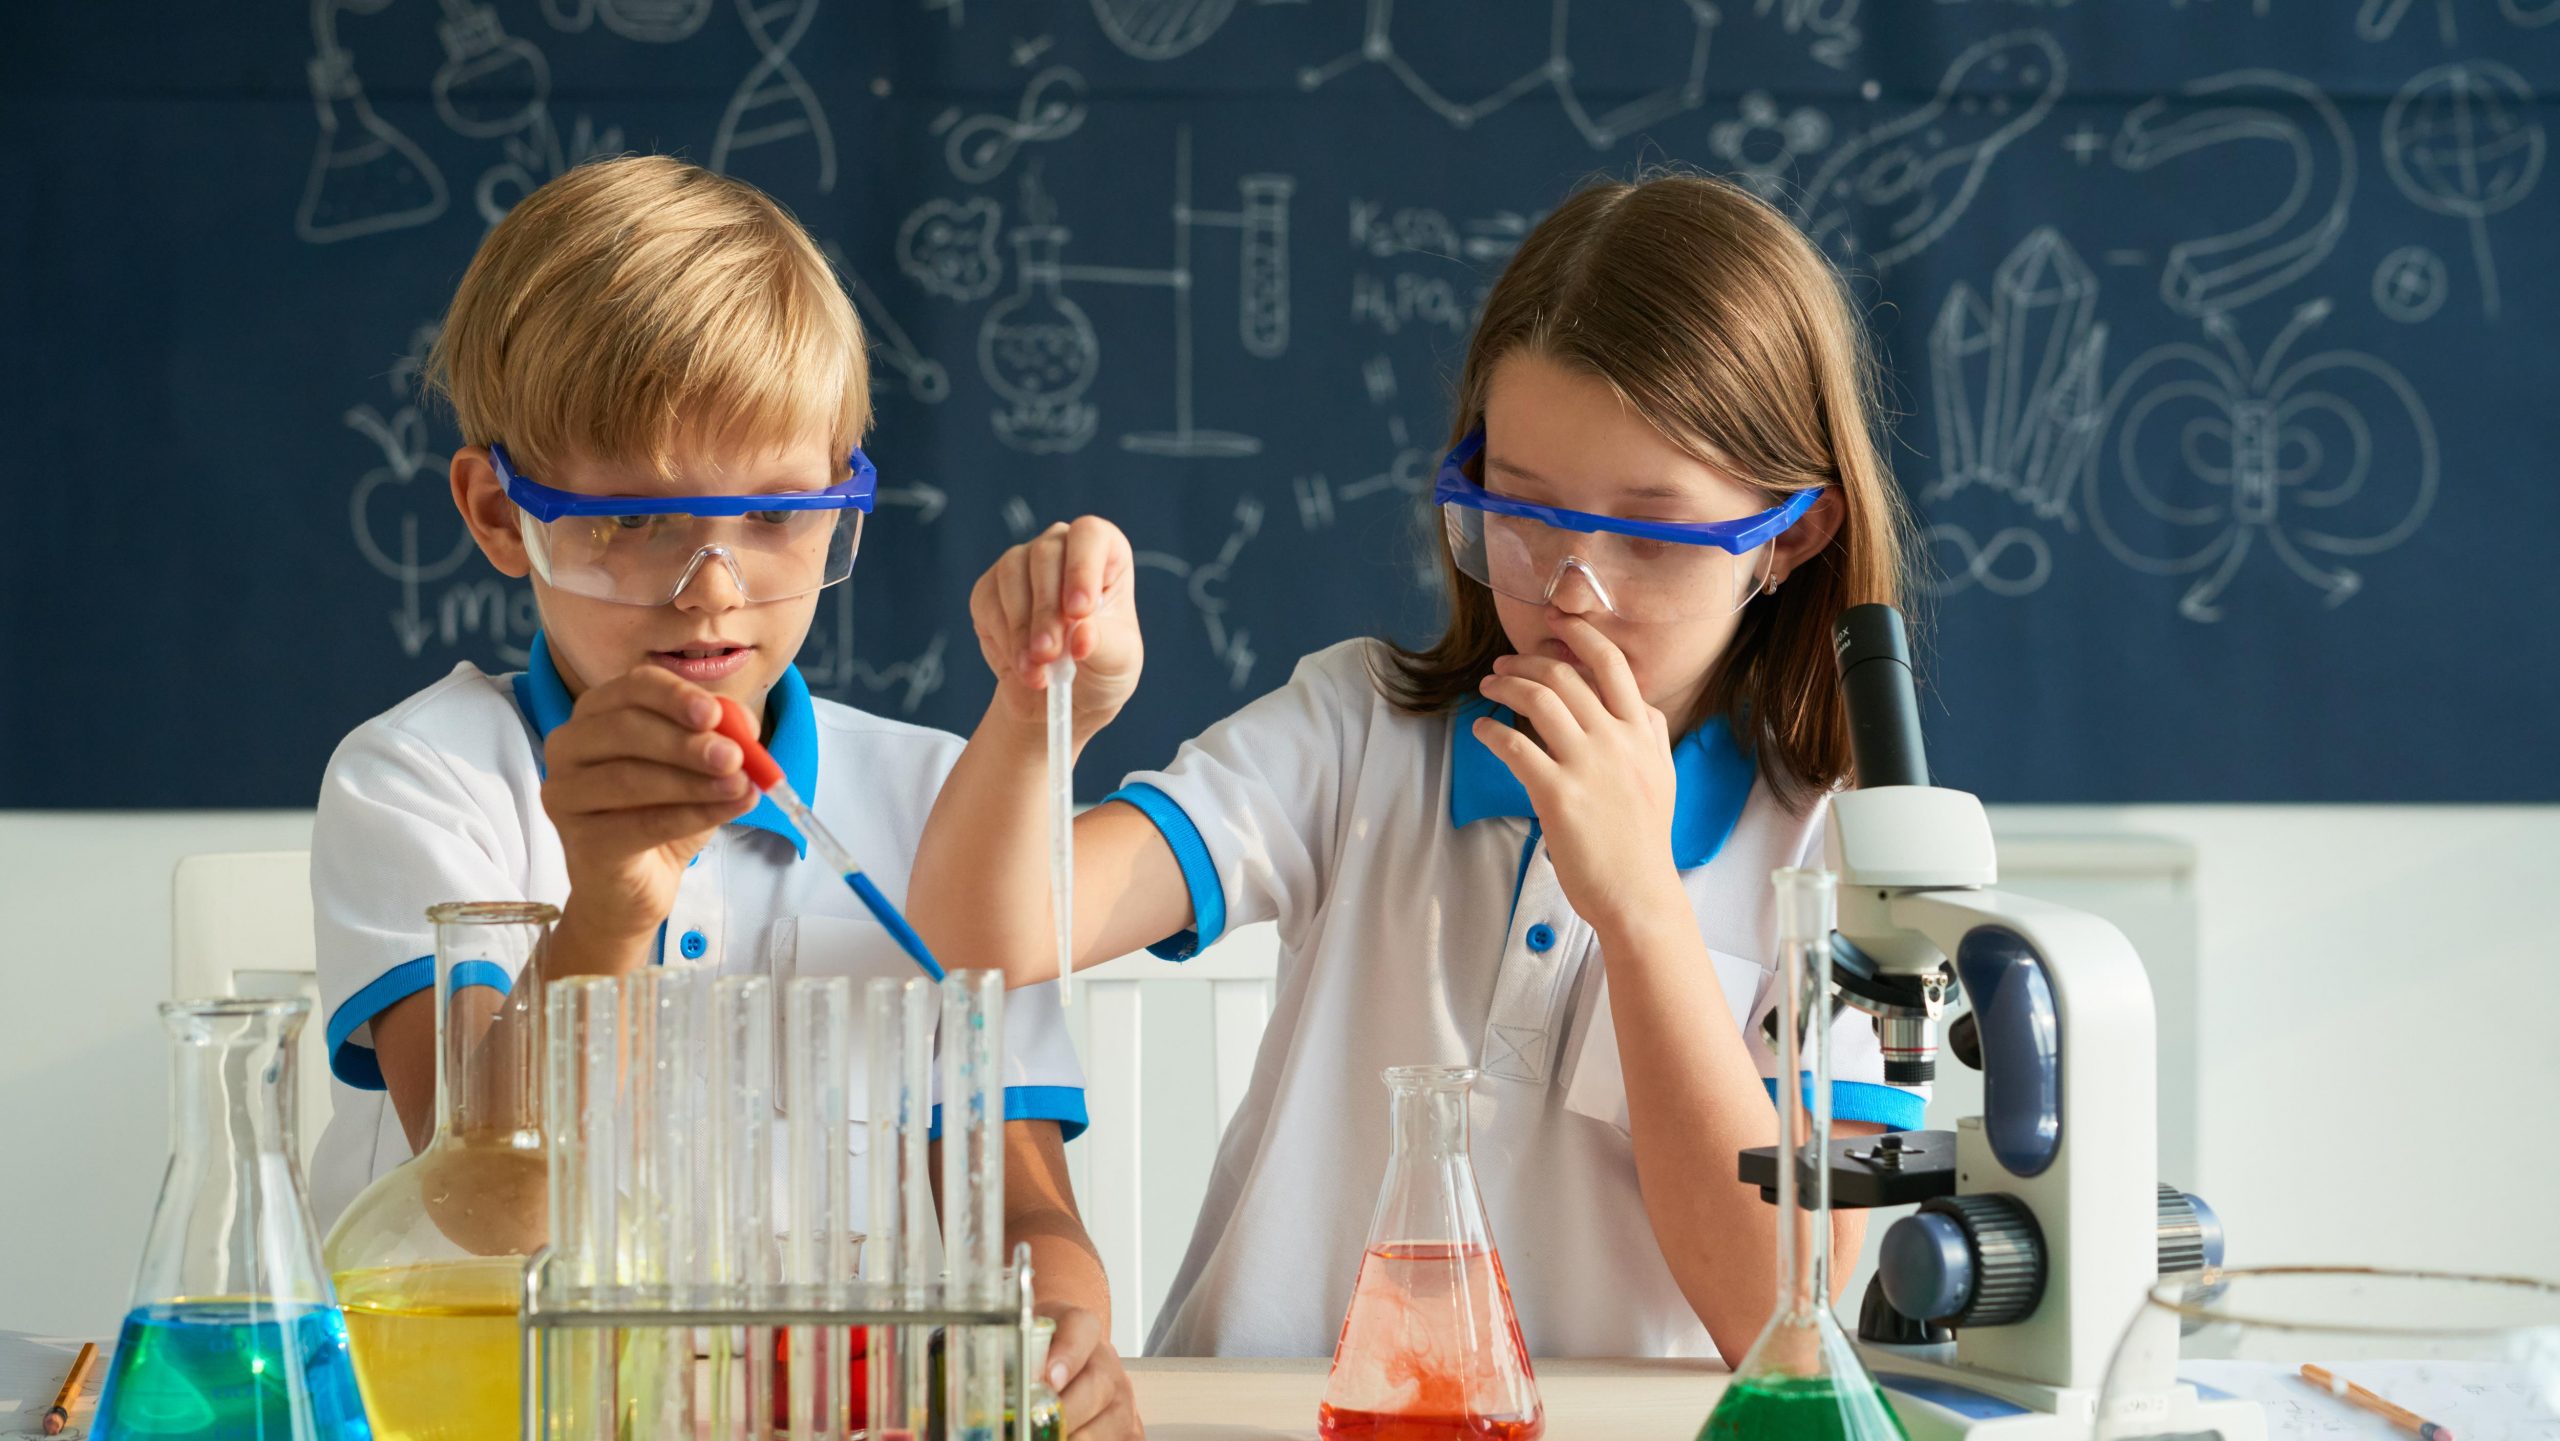 Science, is largely absent from elementary school

